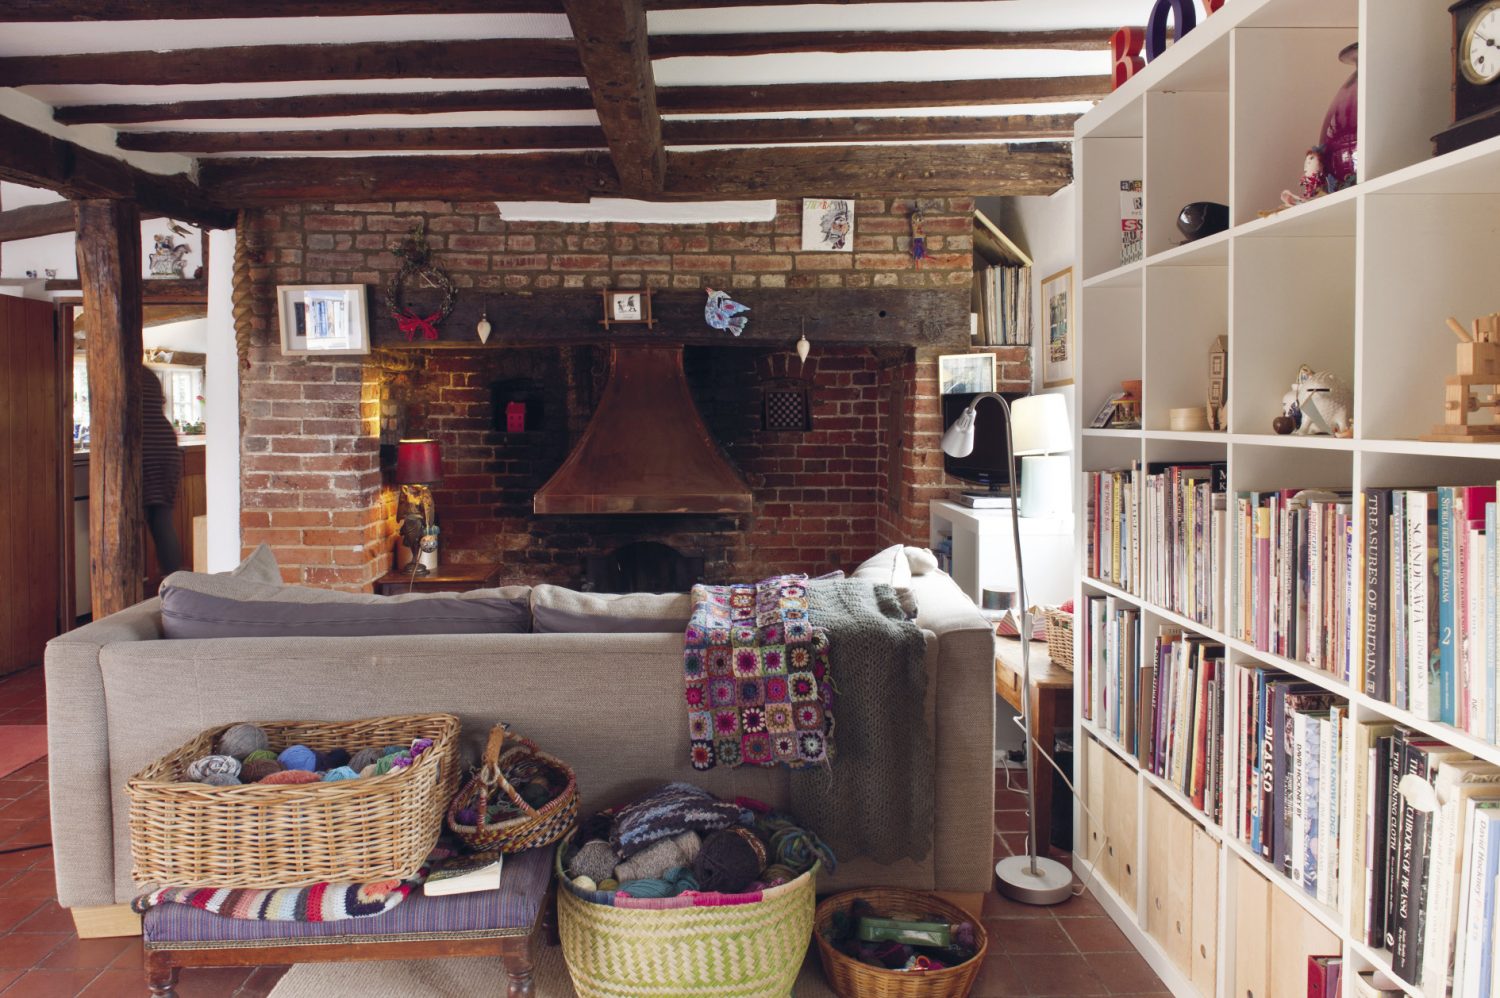 In the sitting room, a large ecru linen-covered sofa faces an inglenook fireplace with baskets of wool stacked all around and behind it